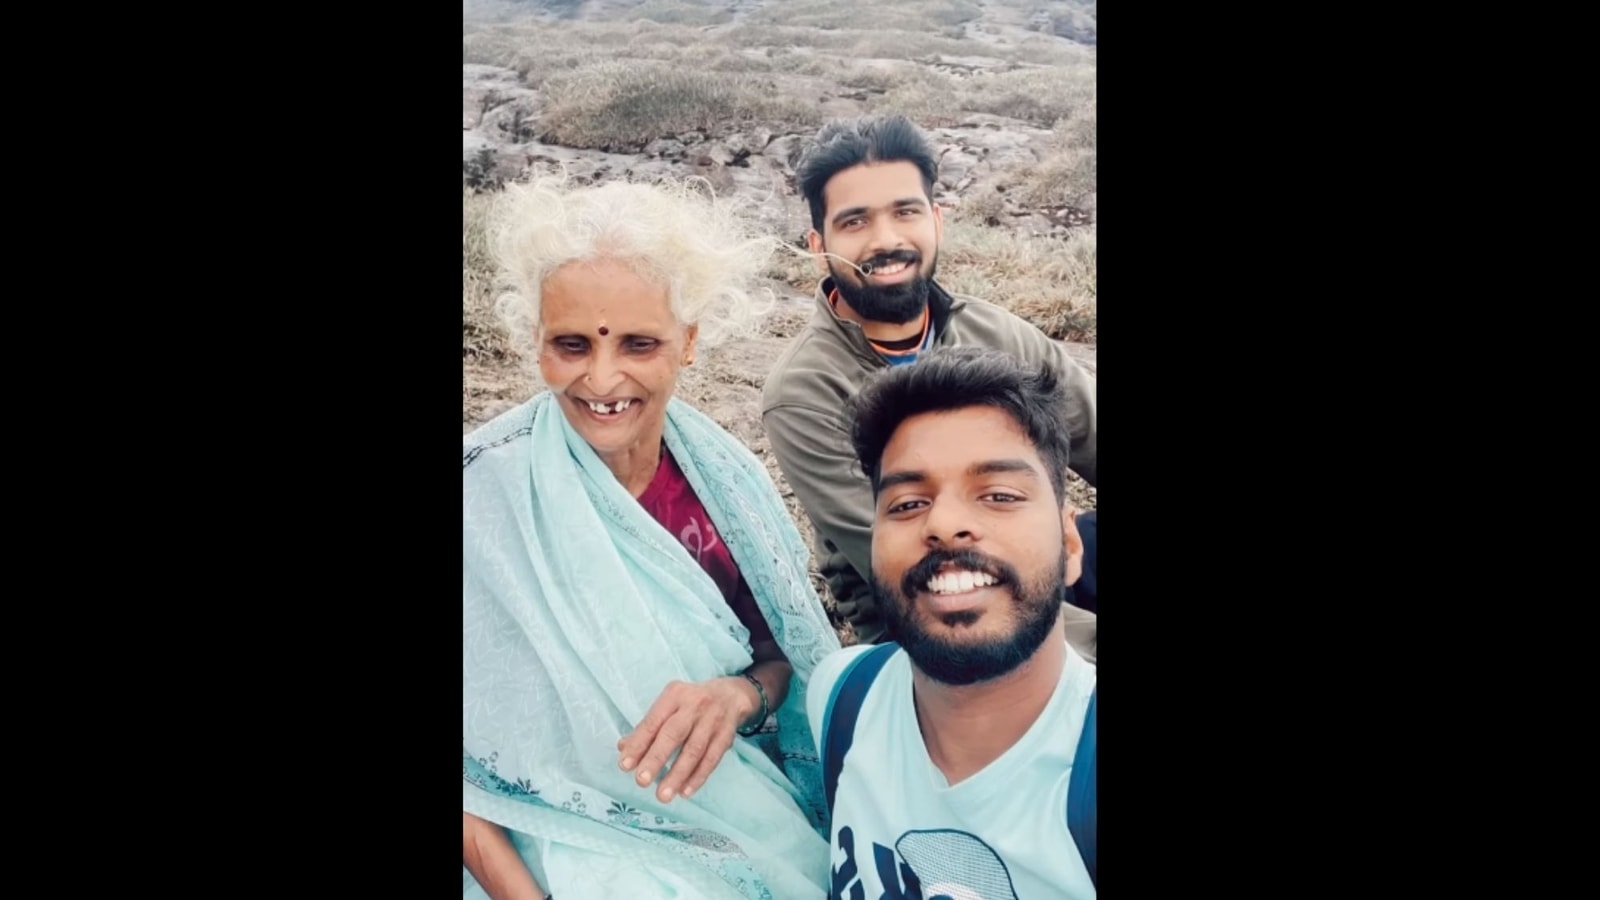 62-year-old woman climbs mountain along with son. Watch inspiring video |  Trending - Hindustan Times